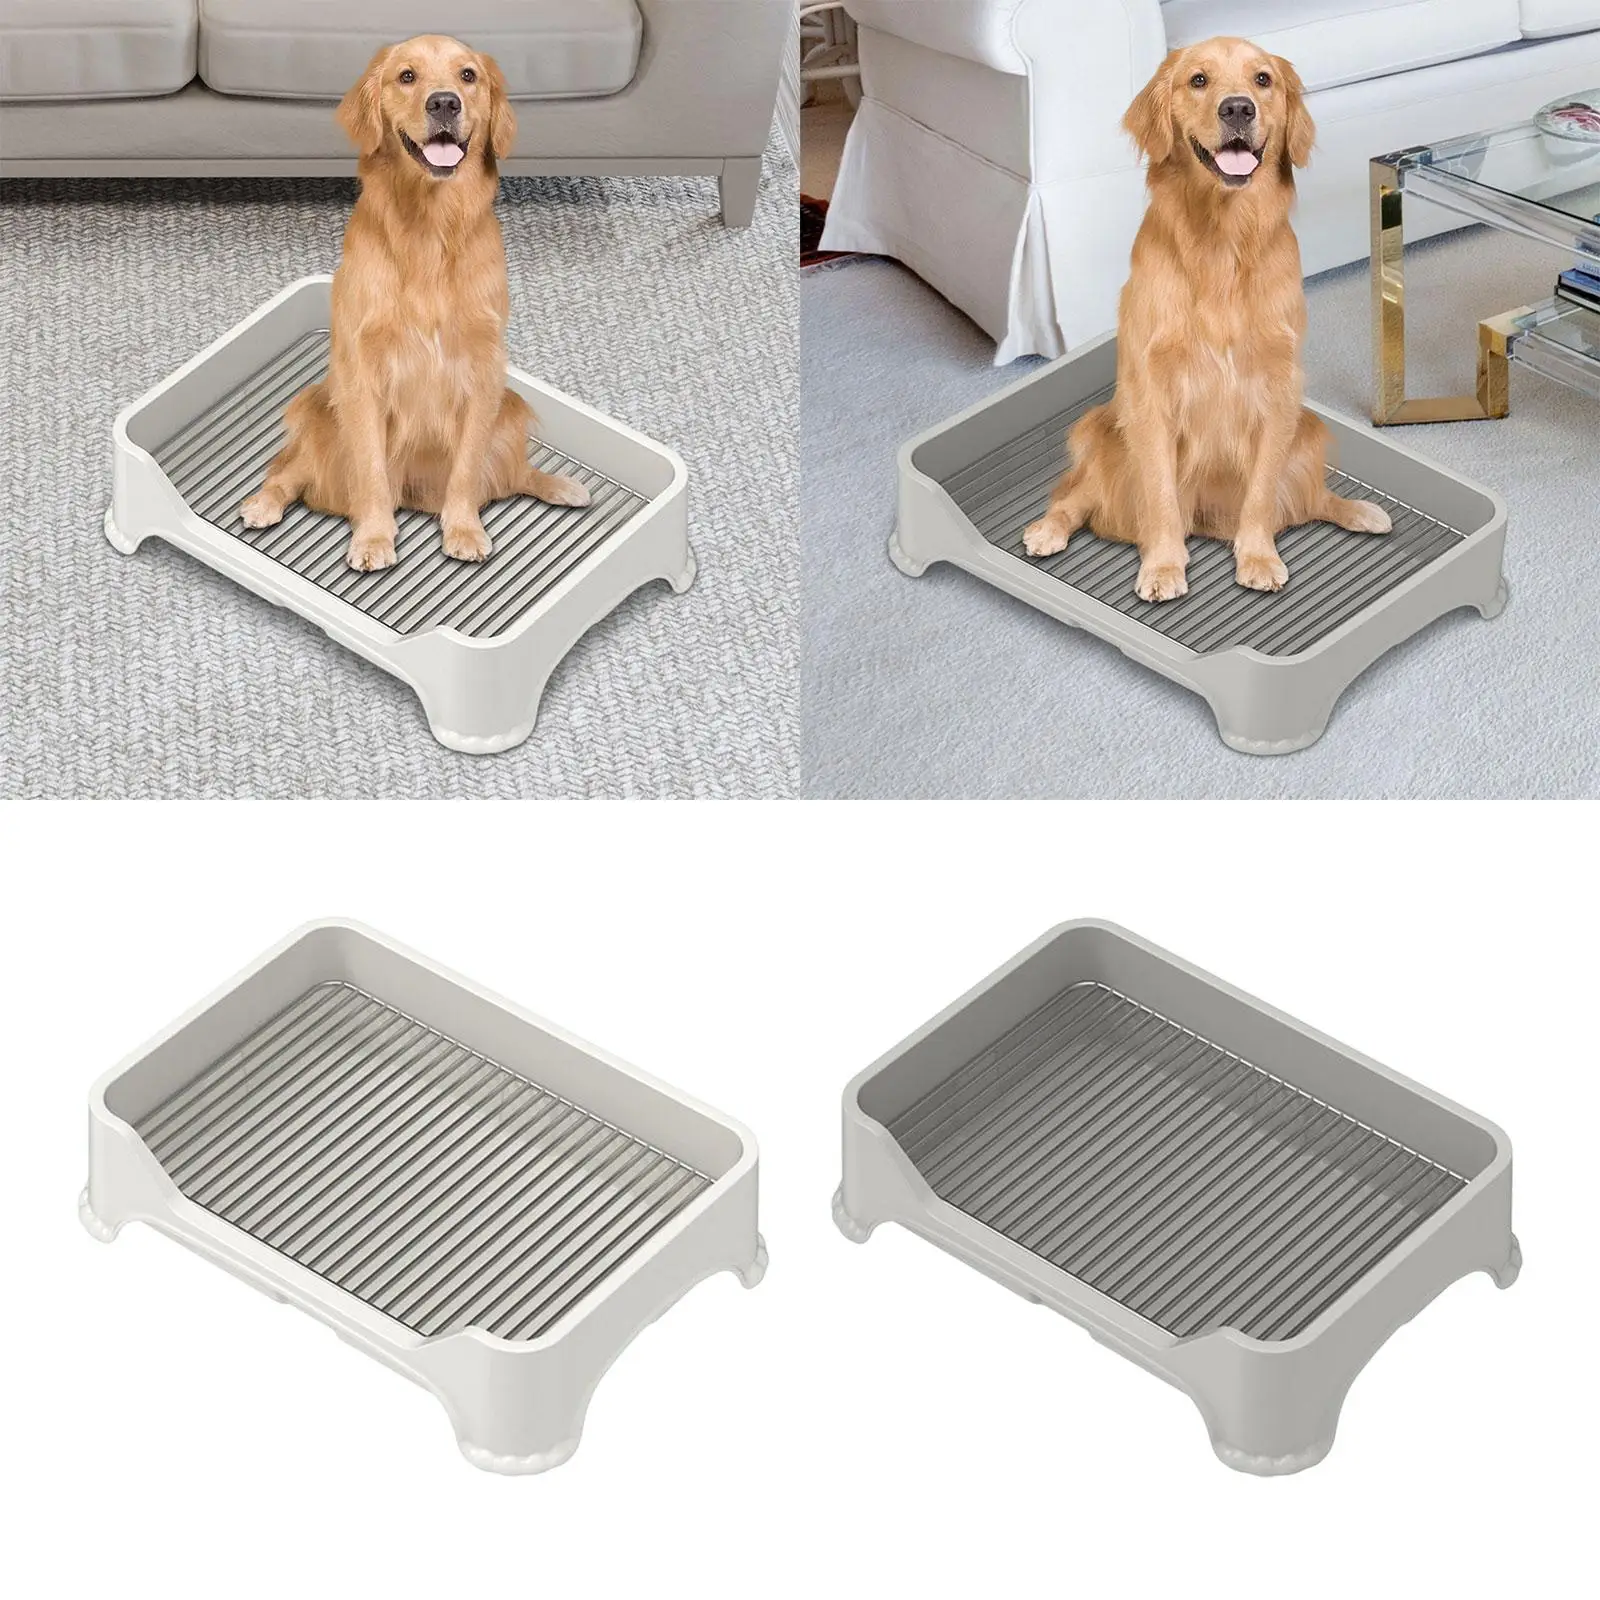 Dog Toilet Dog Potty Pad Holder Indoor Potty Tray Outdoor Trainer Corner Puppy Litter Box Training Potty Tray for Small Dogs